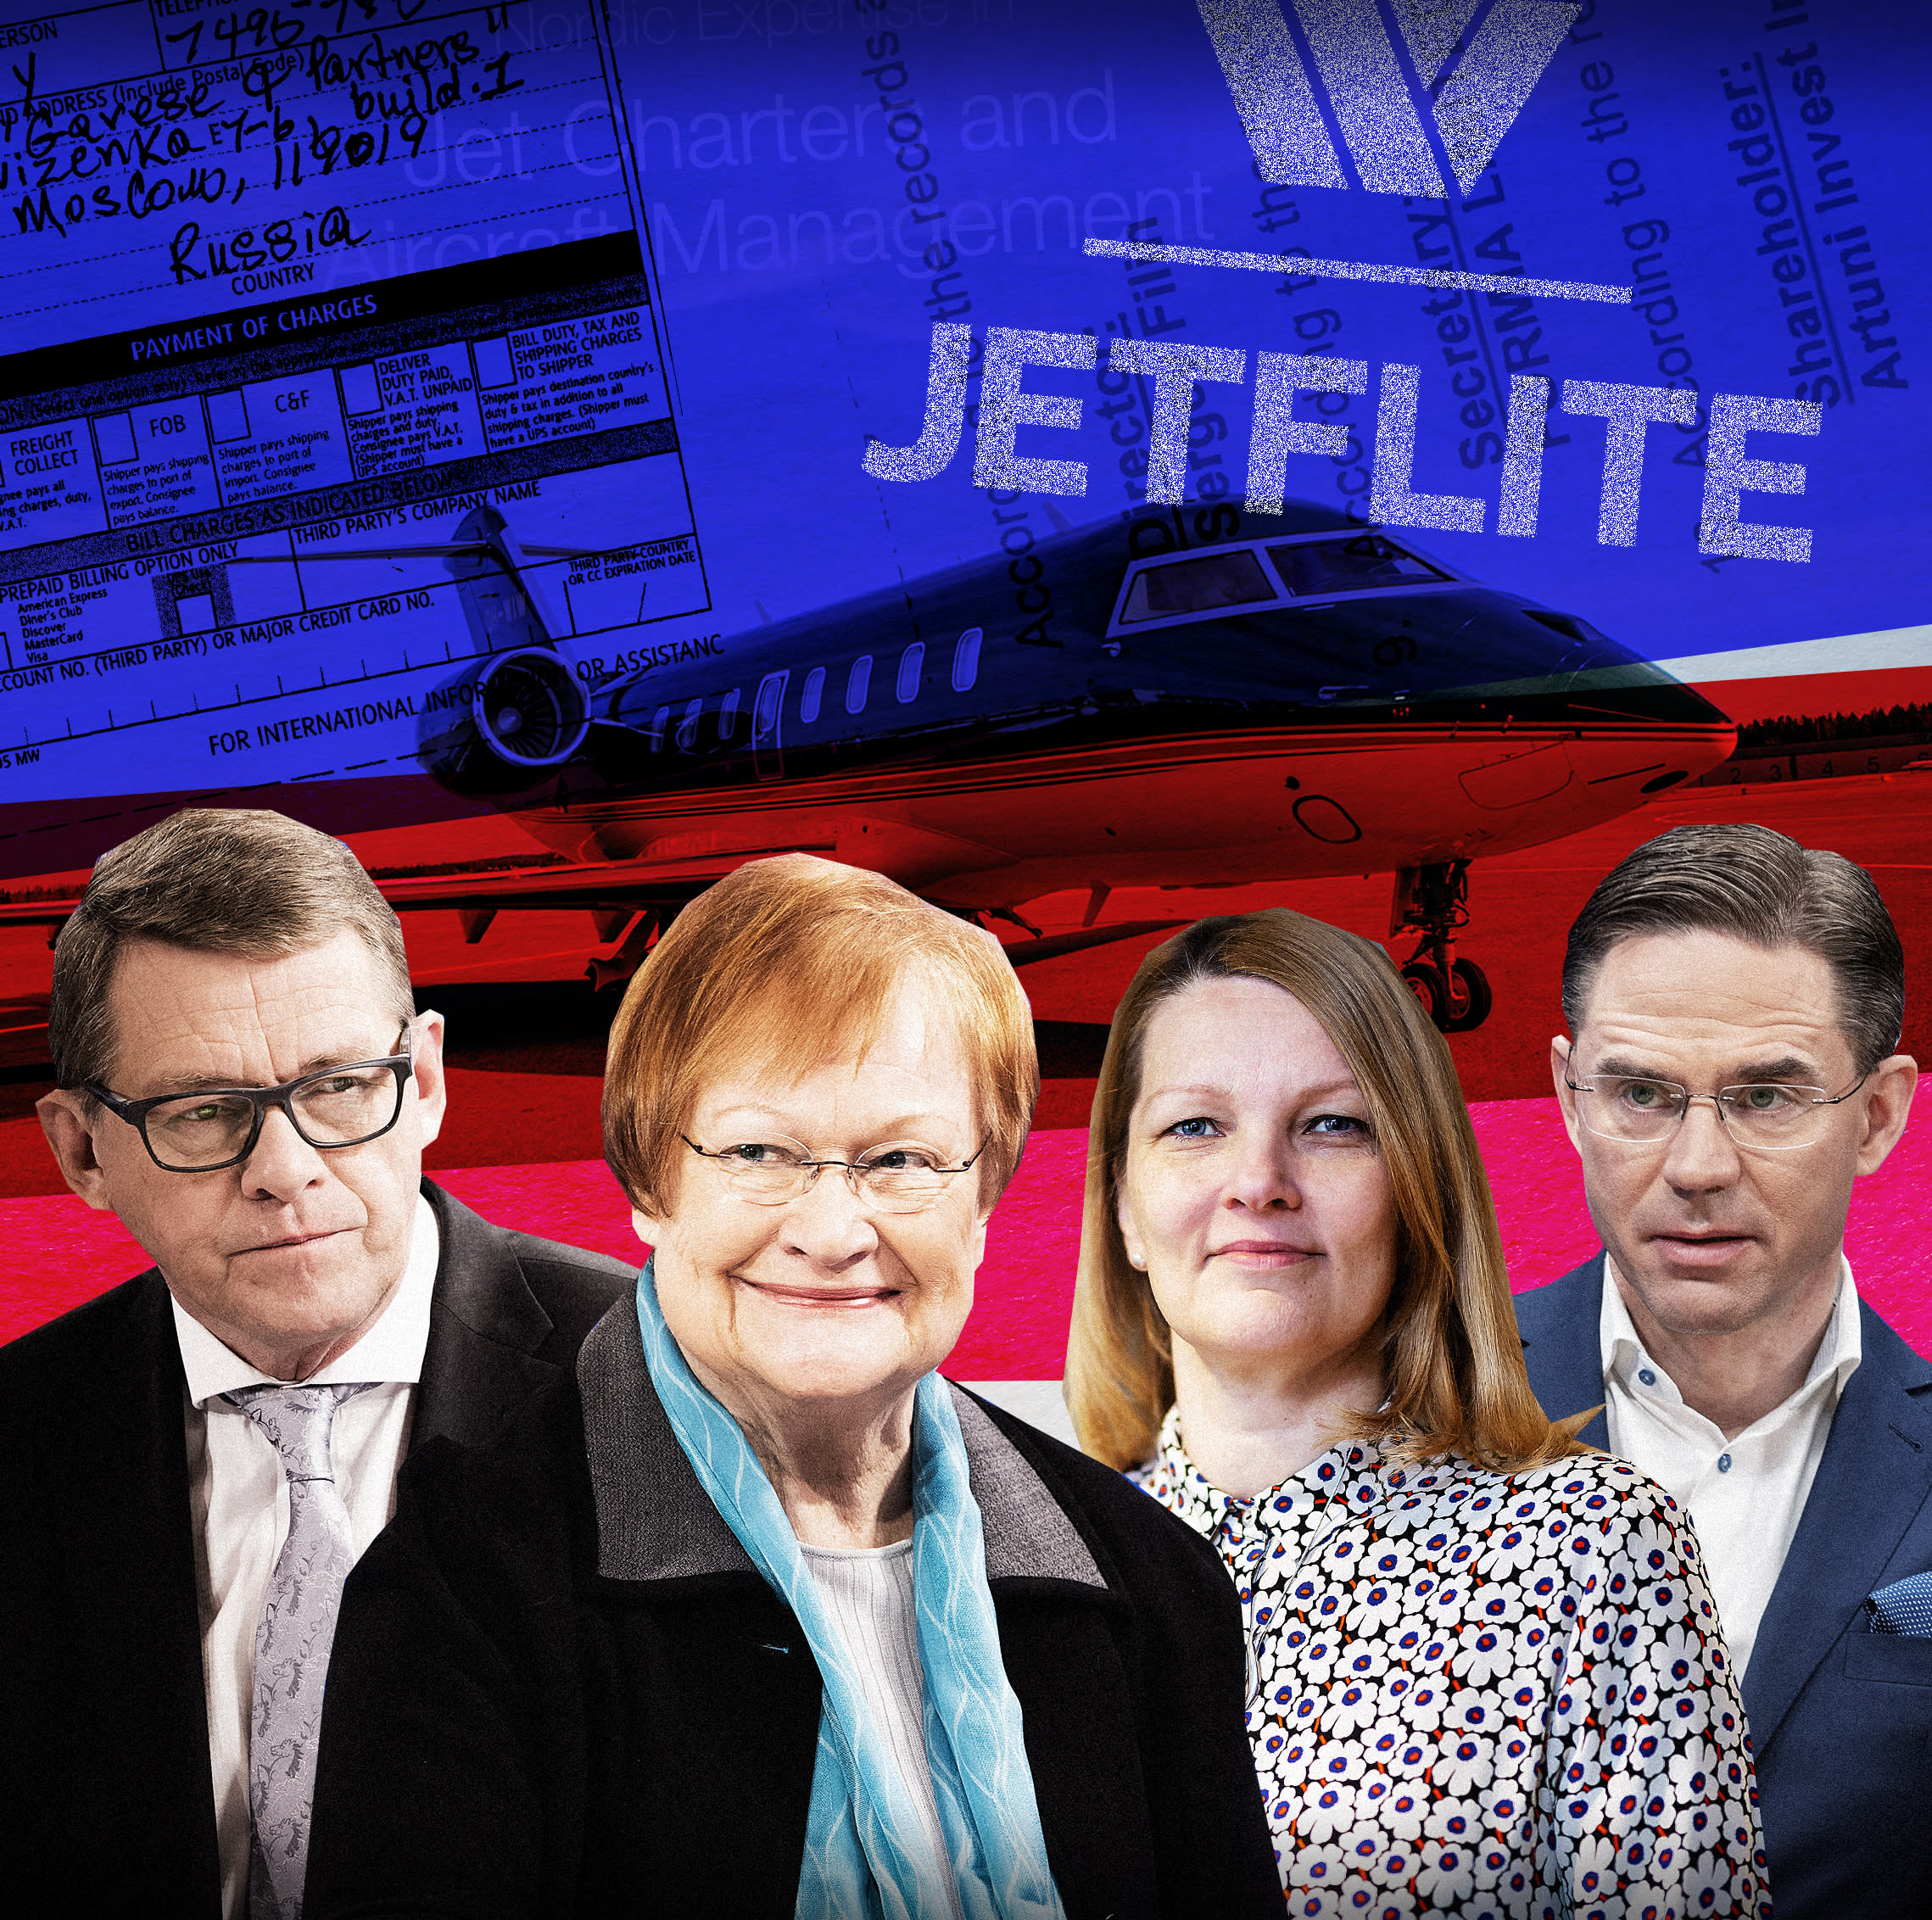 MOT: Former president Halonen, three former prime ministers used private planes of Russian banks